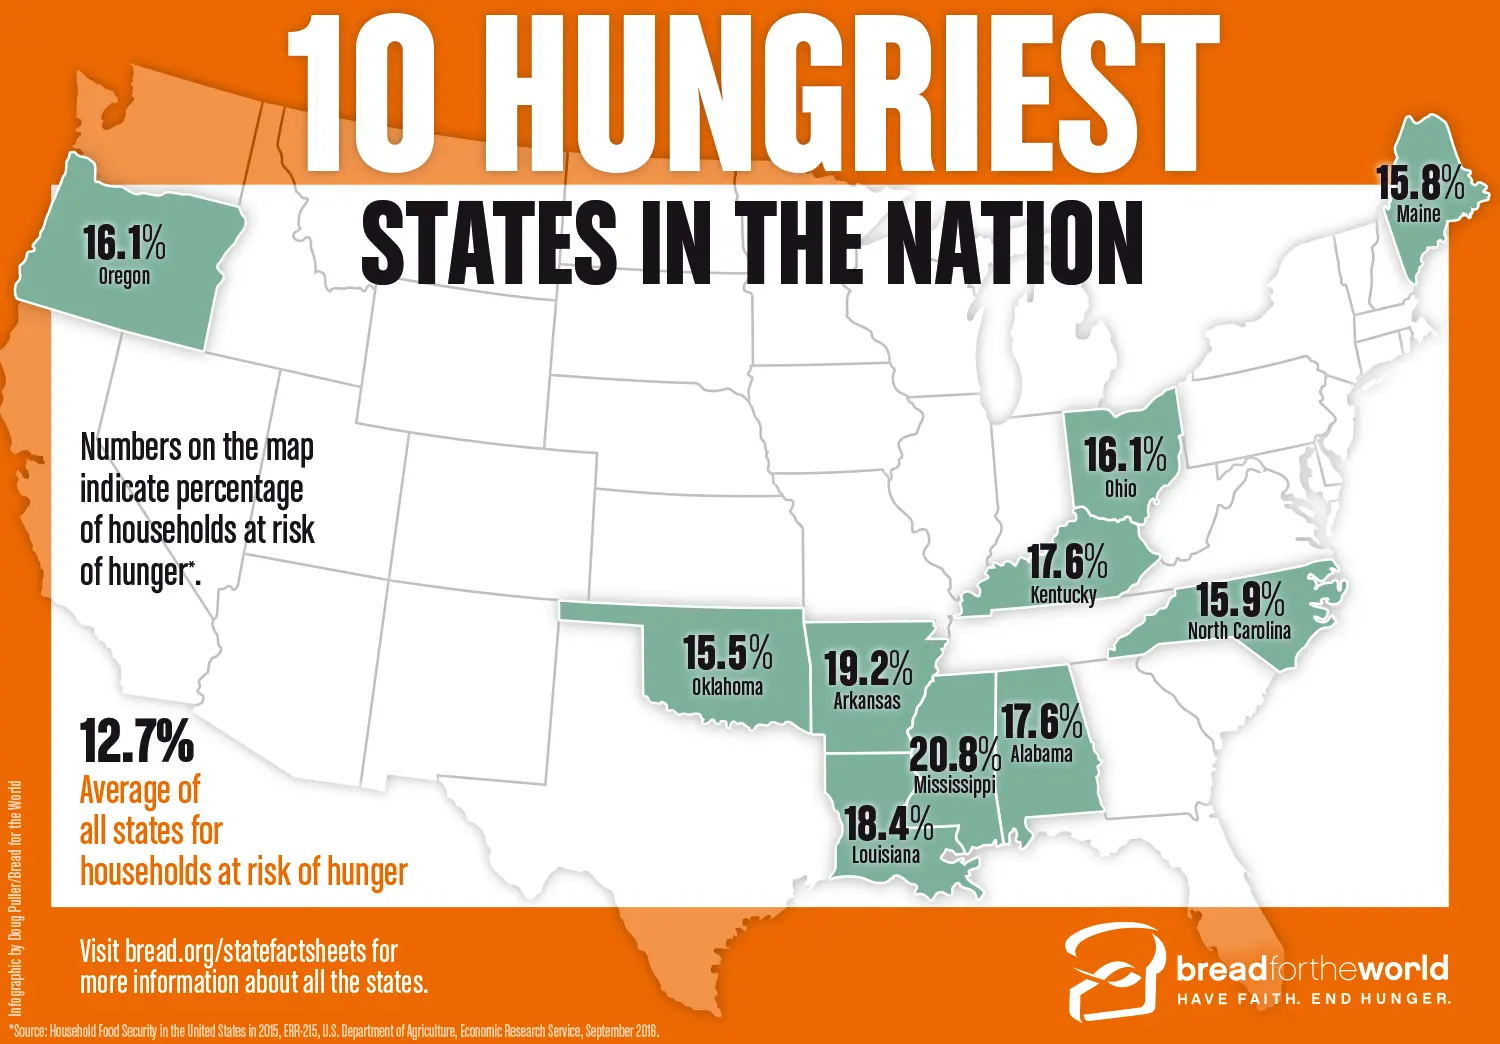 Infographic shows the 10 states with the highest rates of hunger and poverty. Infographic by Doug Puller / Bread for the World